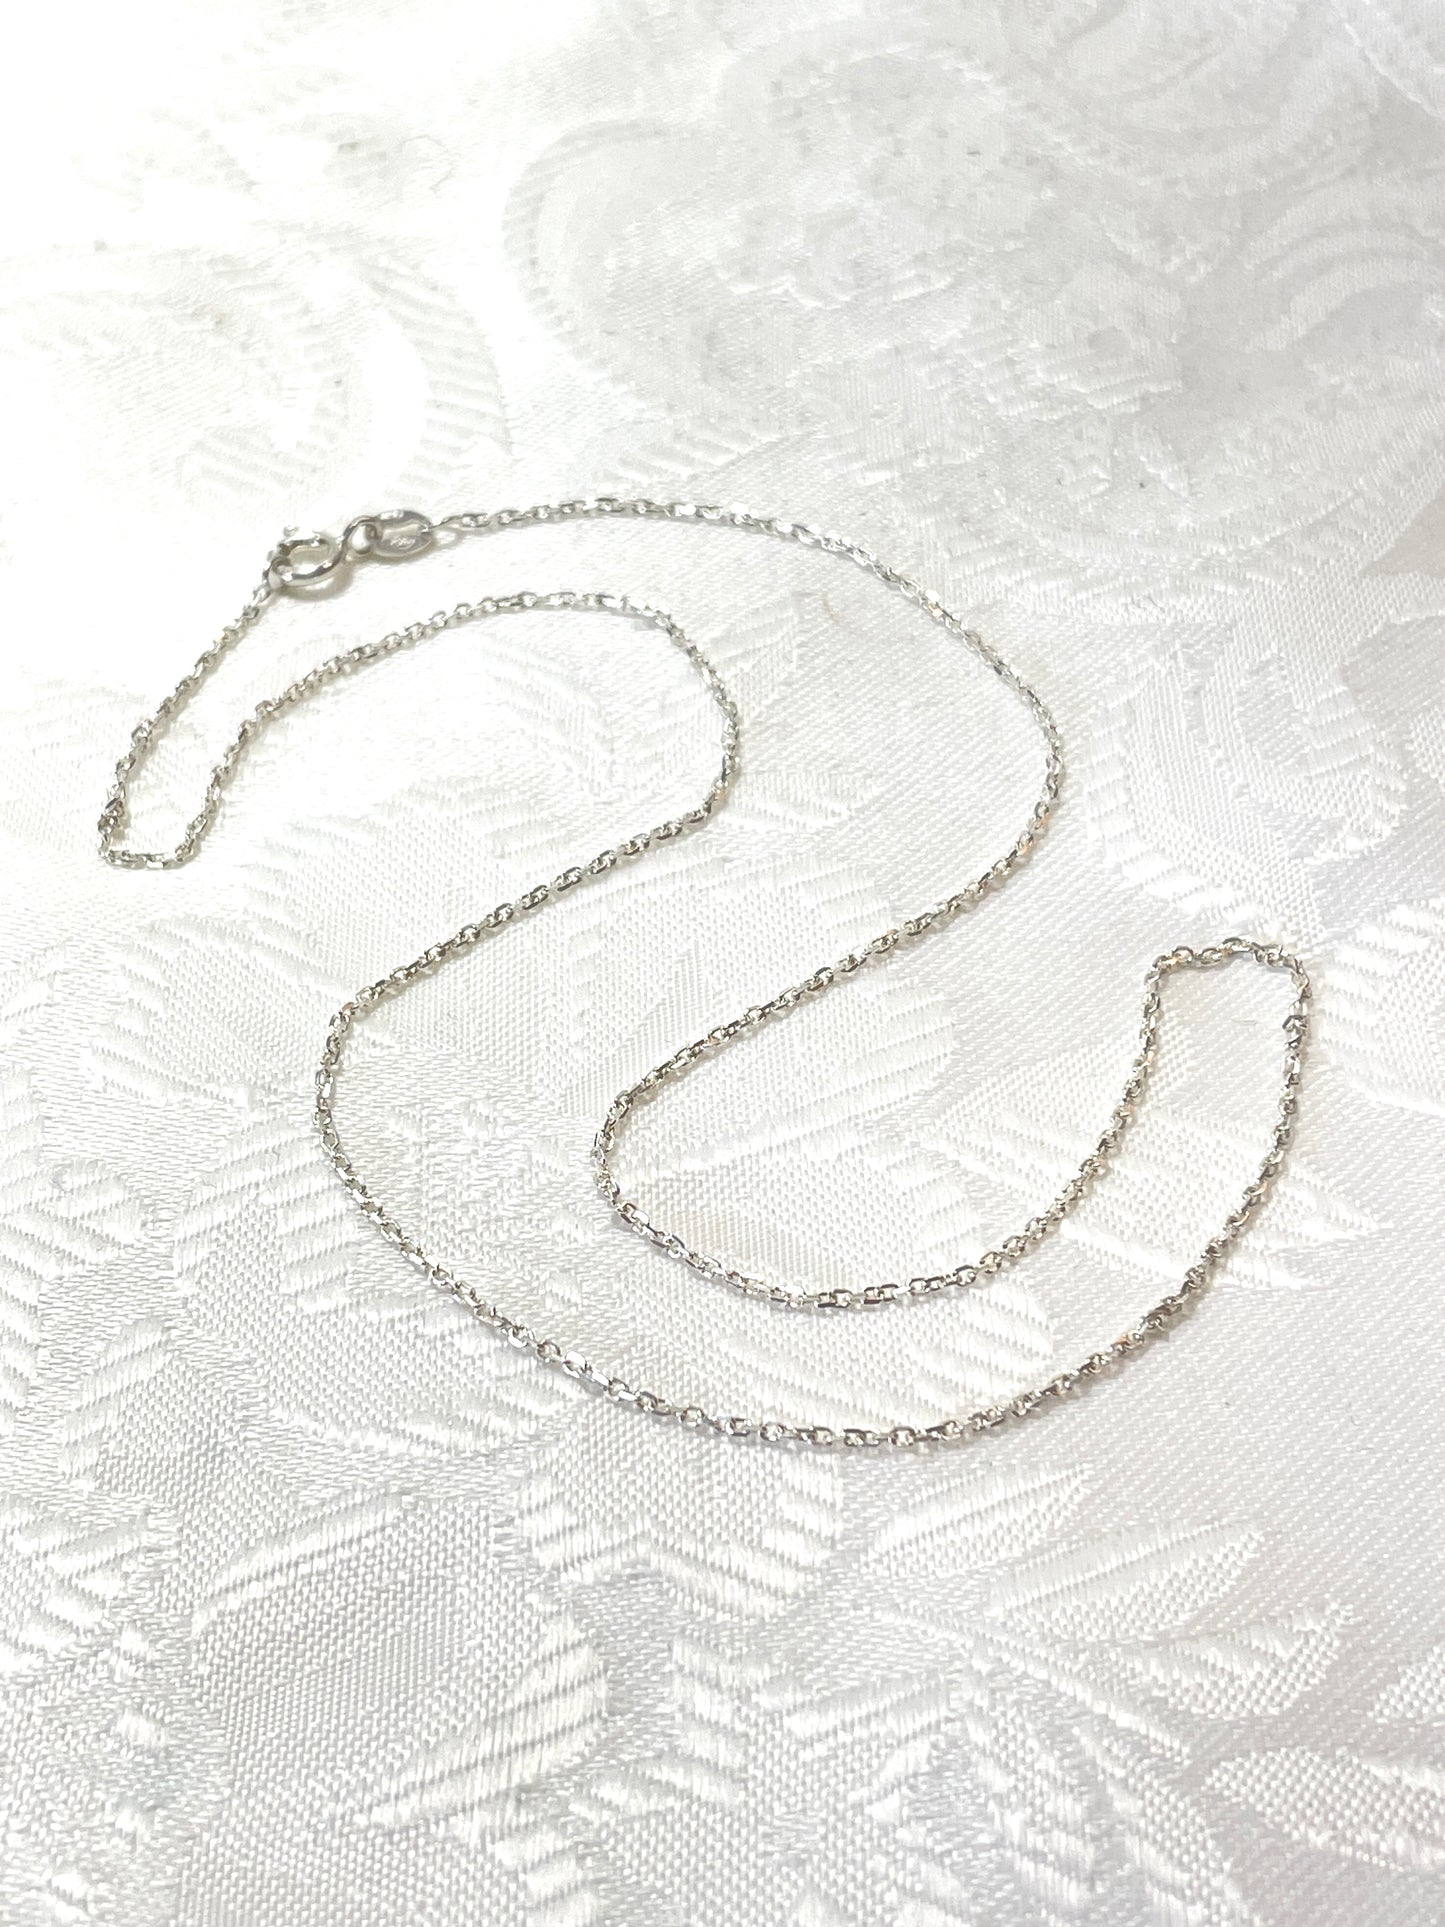 18” 1.2 mm Sterling Silver cable chain